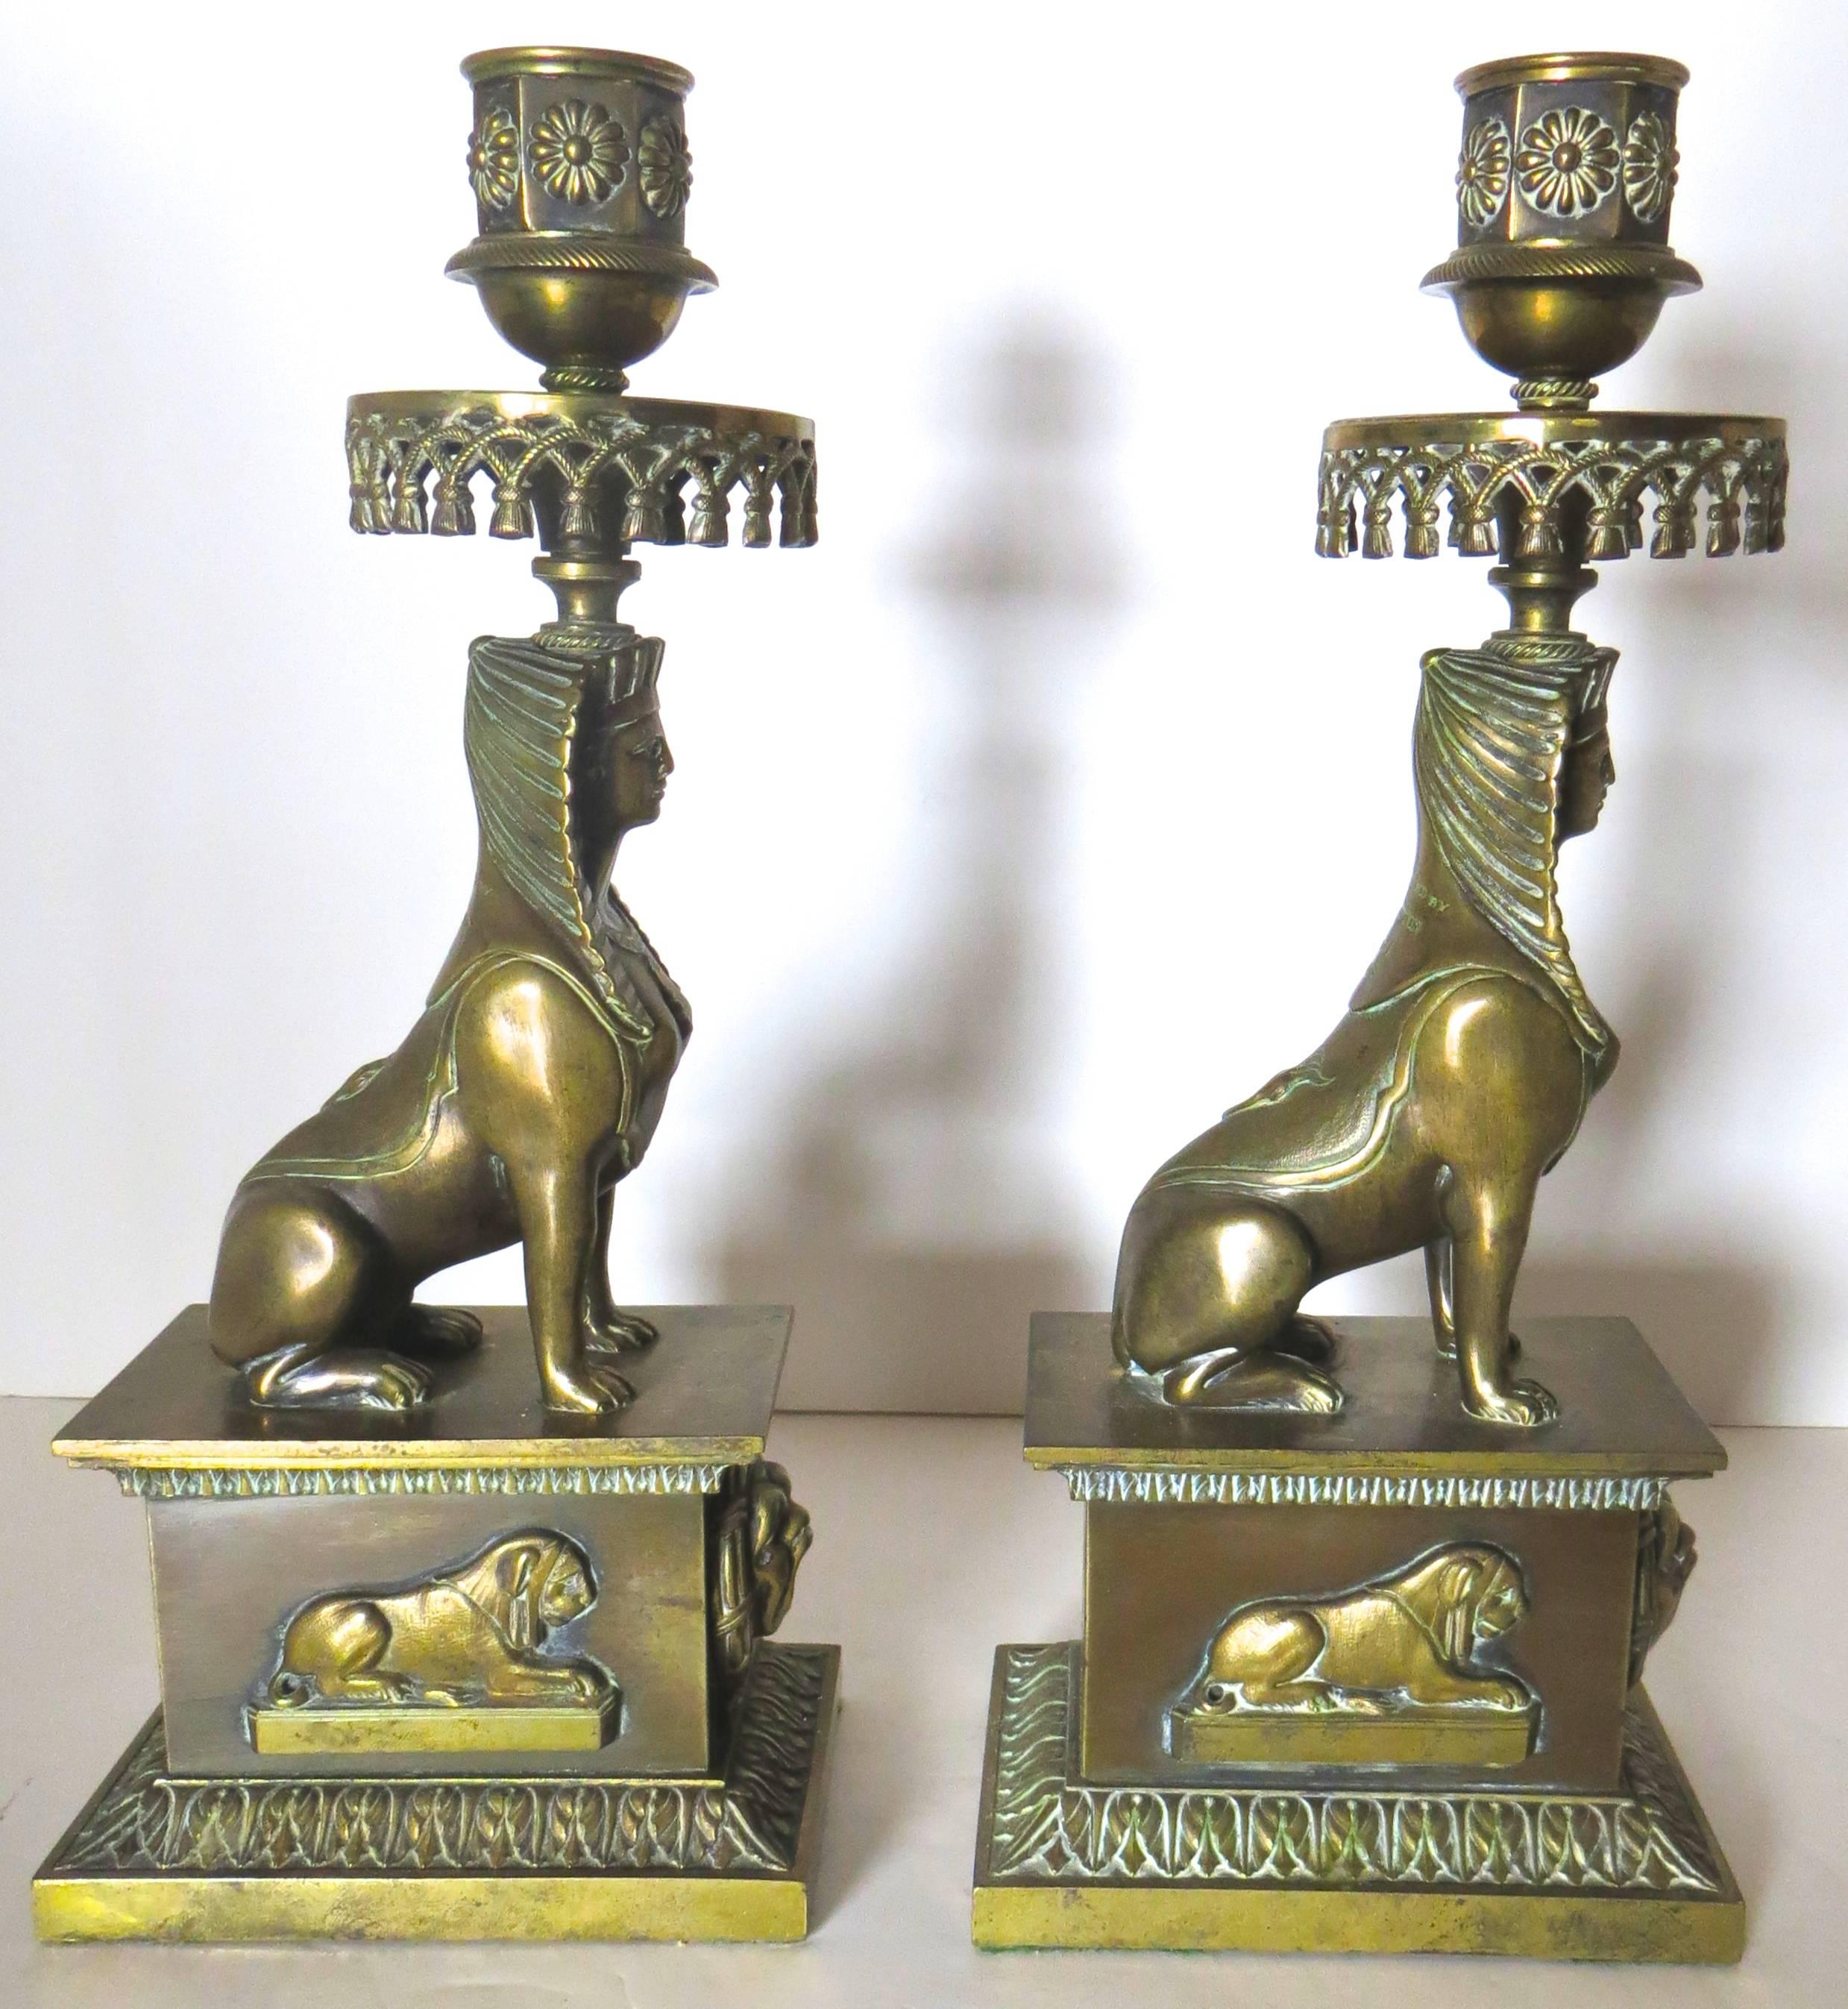 Early 19th Century Egyptian Motif Pair of Regency Candleholders by George Penton English circa 1808